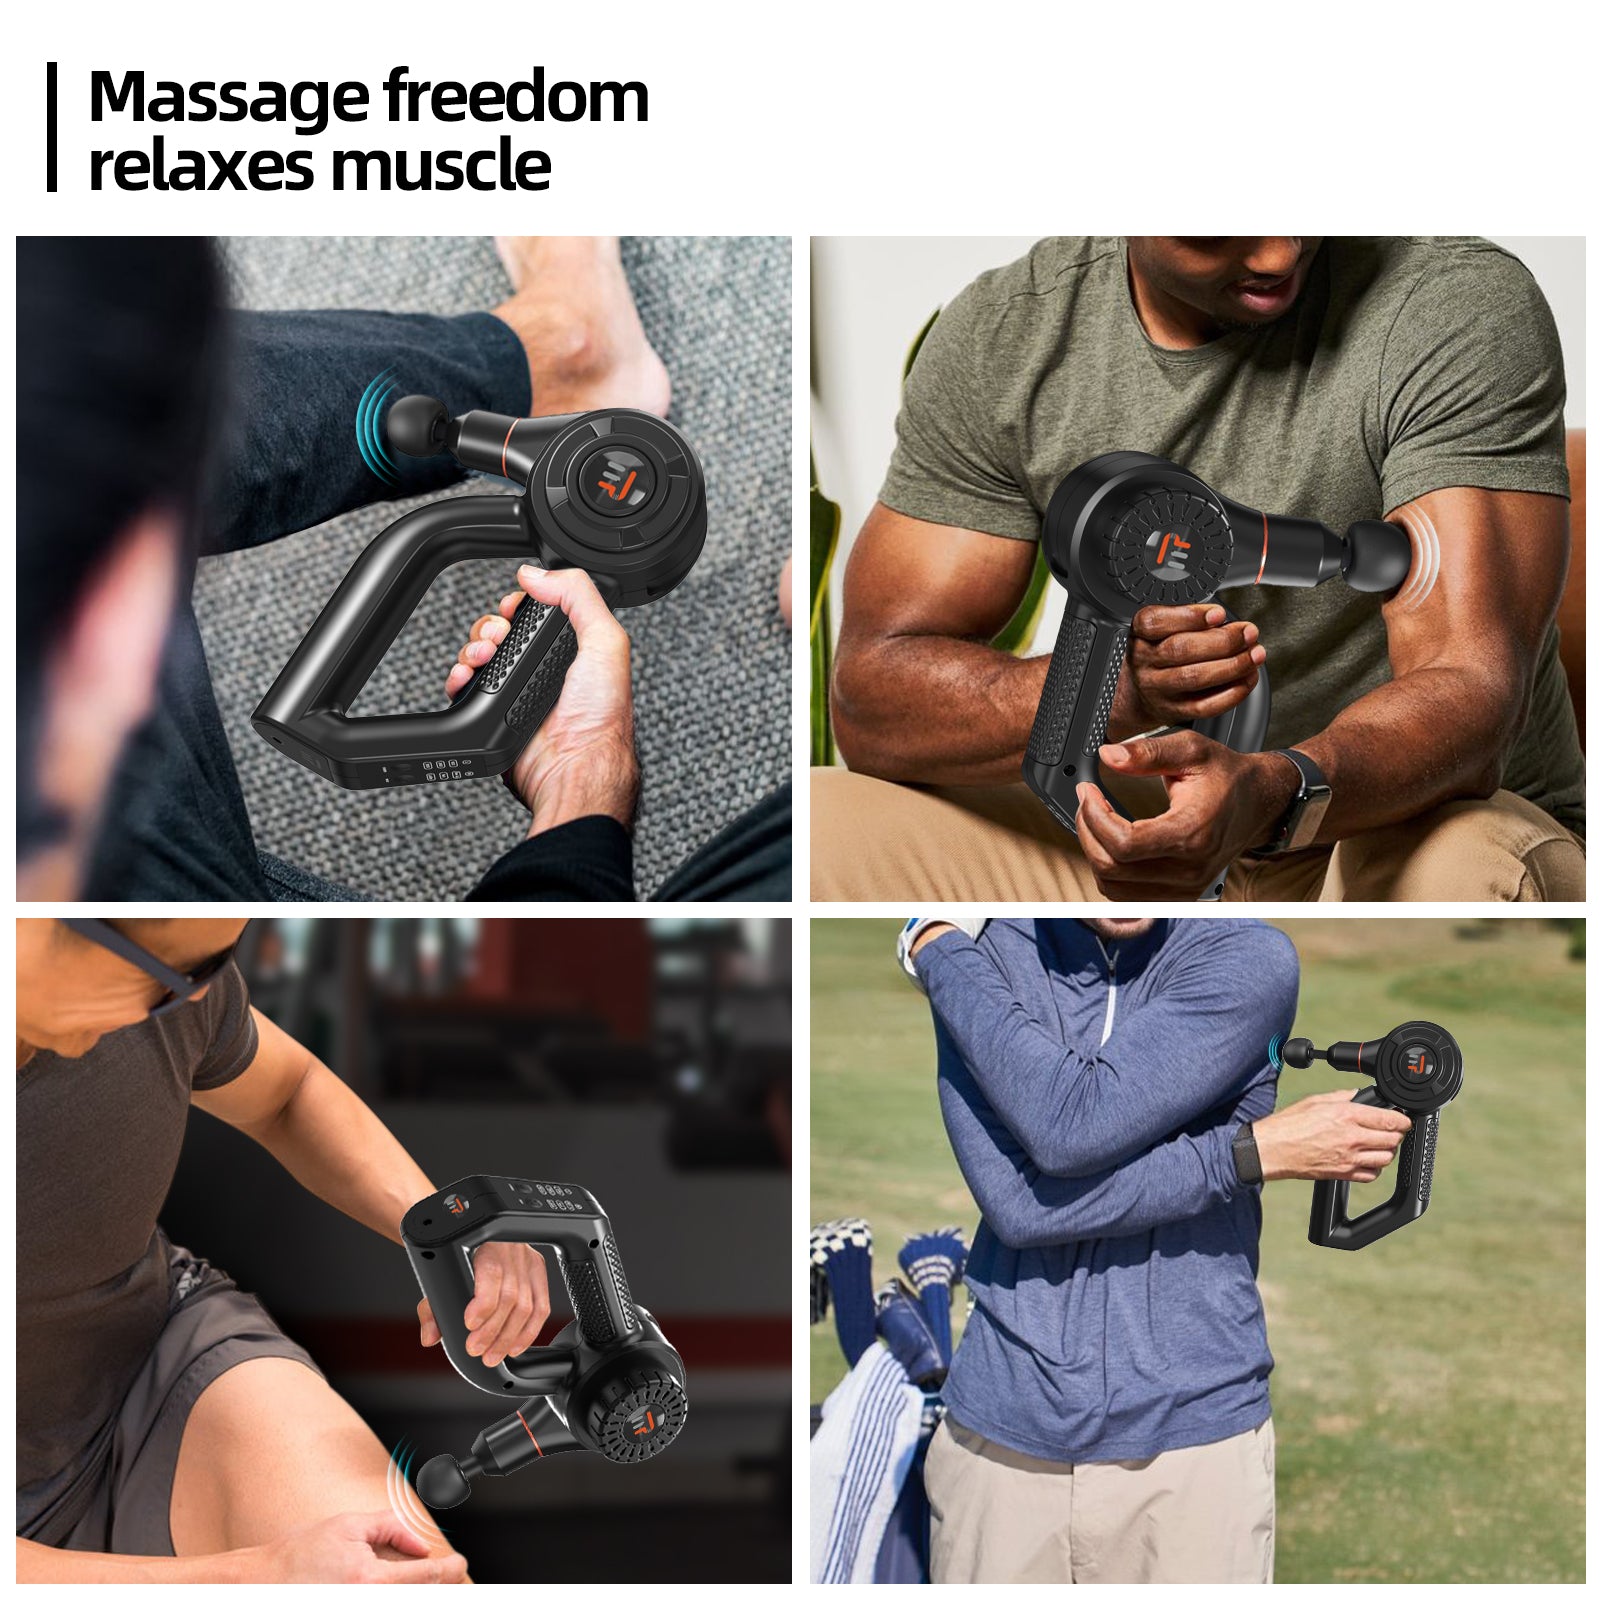 Megun can deeply relieve the body's soreness through deep and powerful muscle massage after exercise